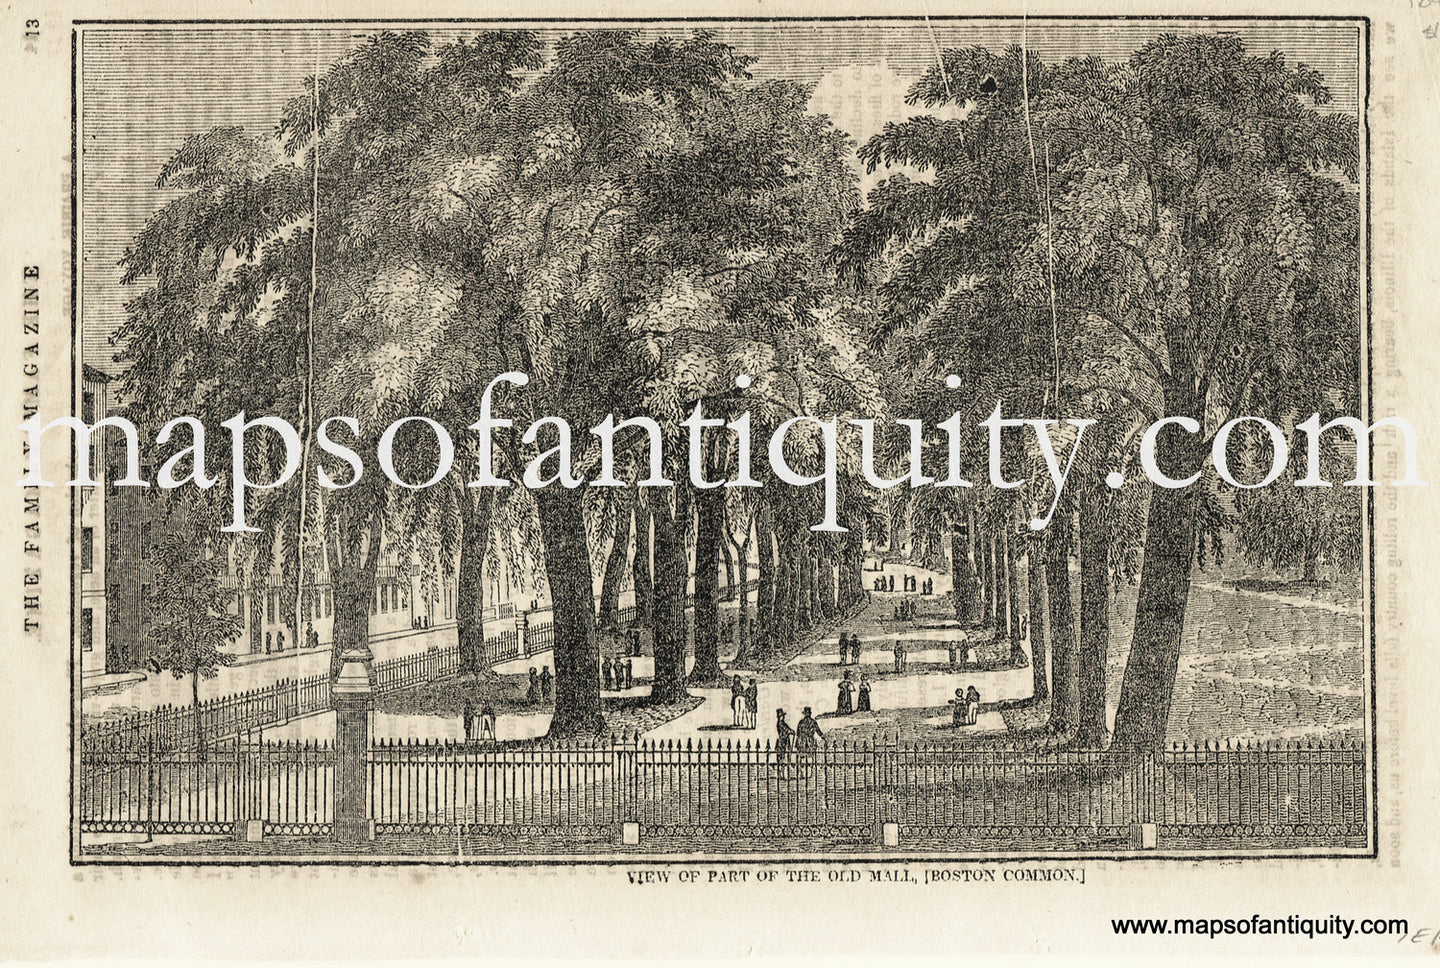 Antique-Uncolored-Print-View-of-Part-of-the-Old-Mall-(Boston-Common)-Massachusetts-Boston-1839/1843-The-Family-Magazine-Maps-Of-Antiquity